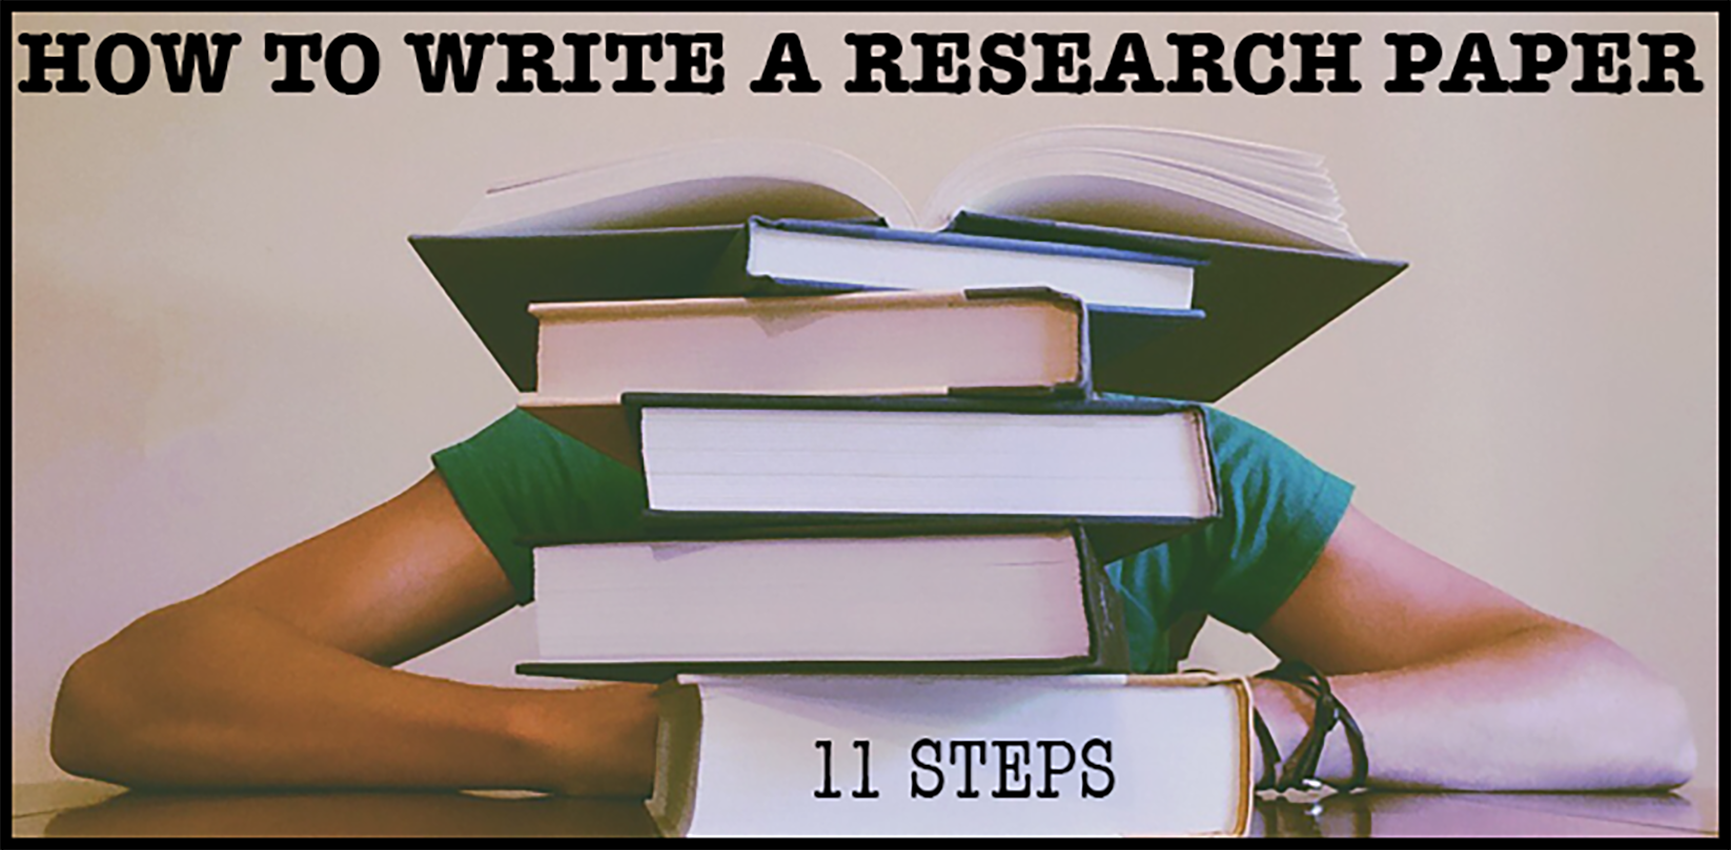 How to write research papers